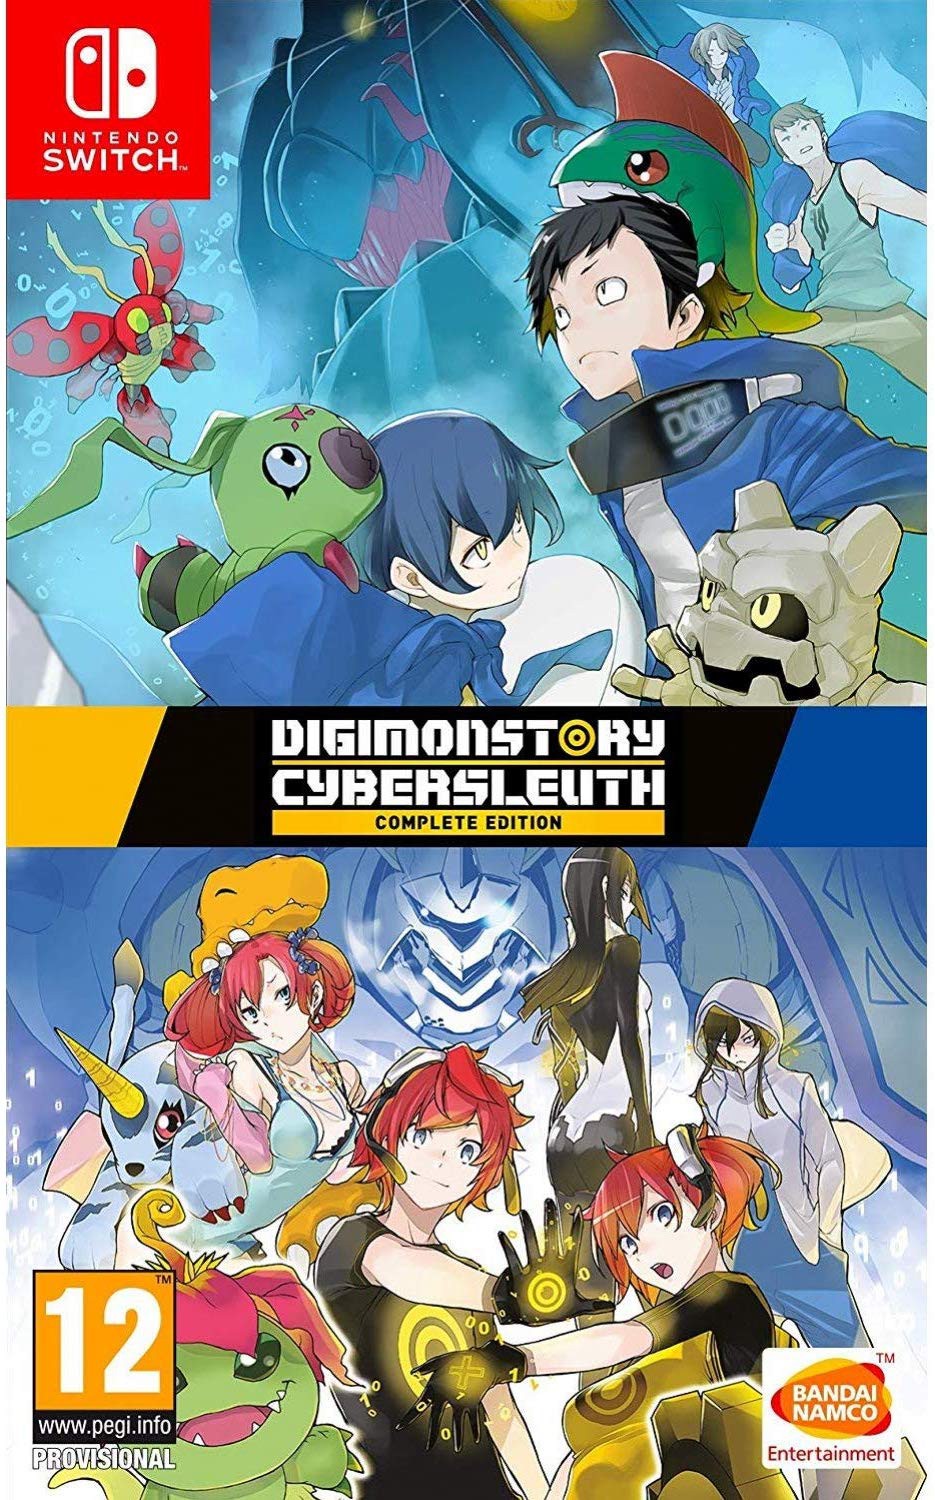 Digimon story: Cyber sleuth Complete Edition